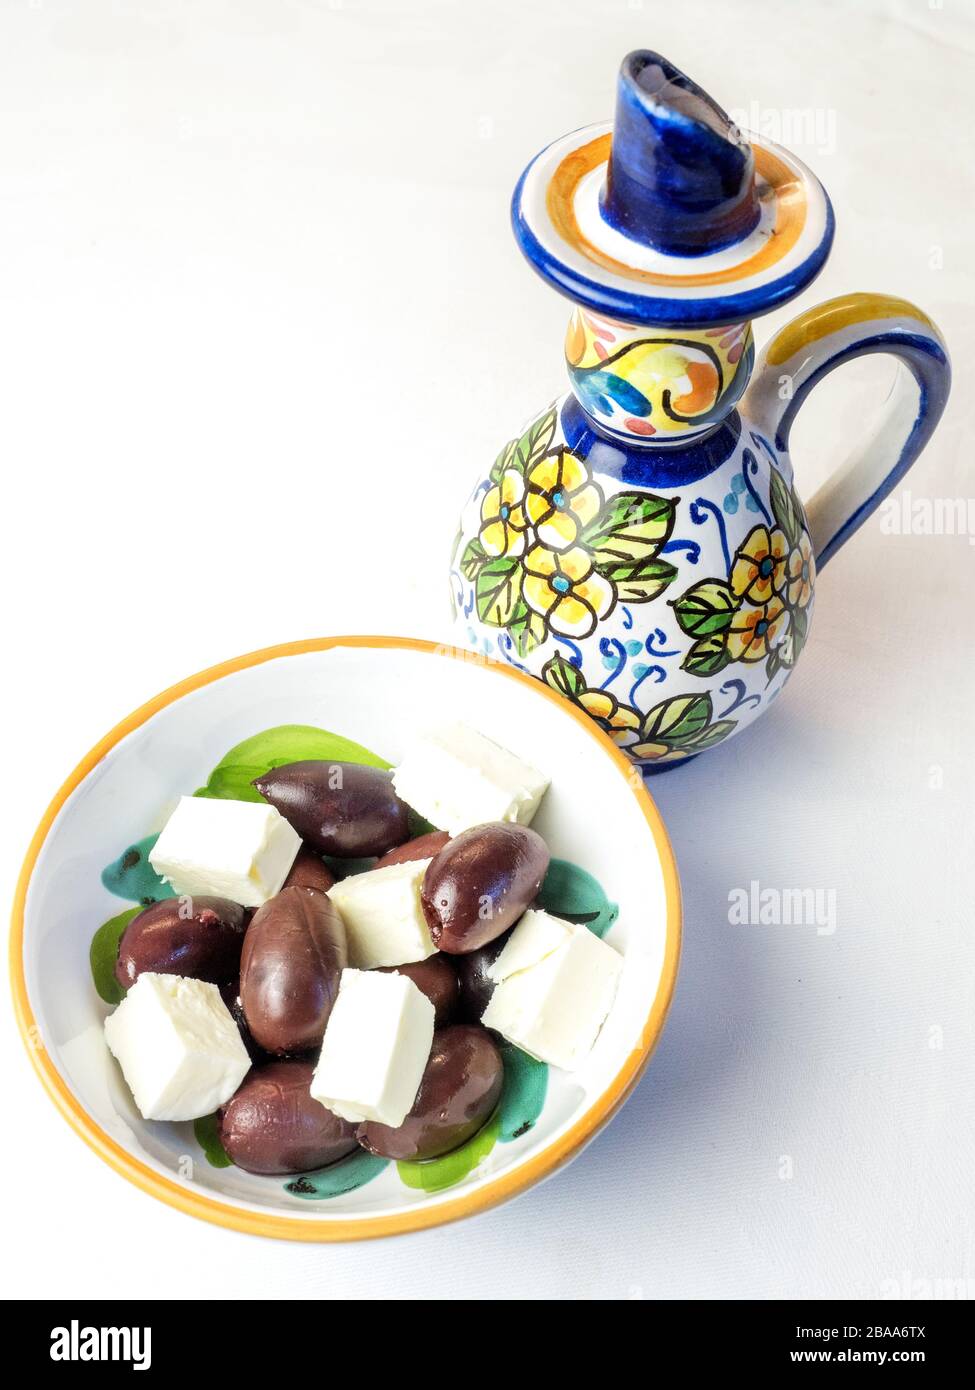 Kalamata olives and feta cheese in a bowl with a decorative oil jug on a white tablecloth Stock Photo